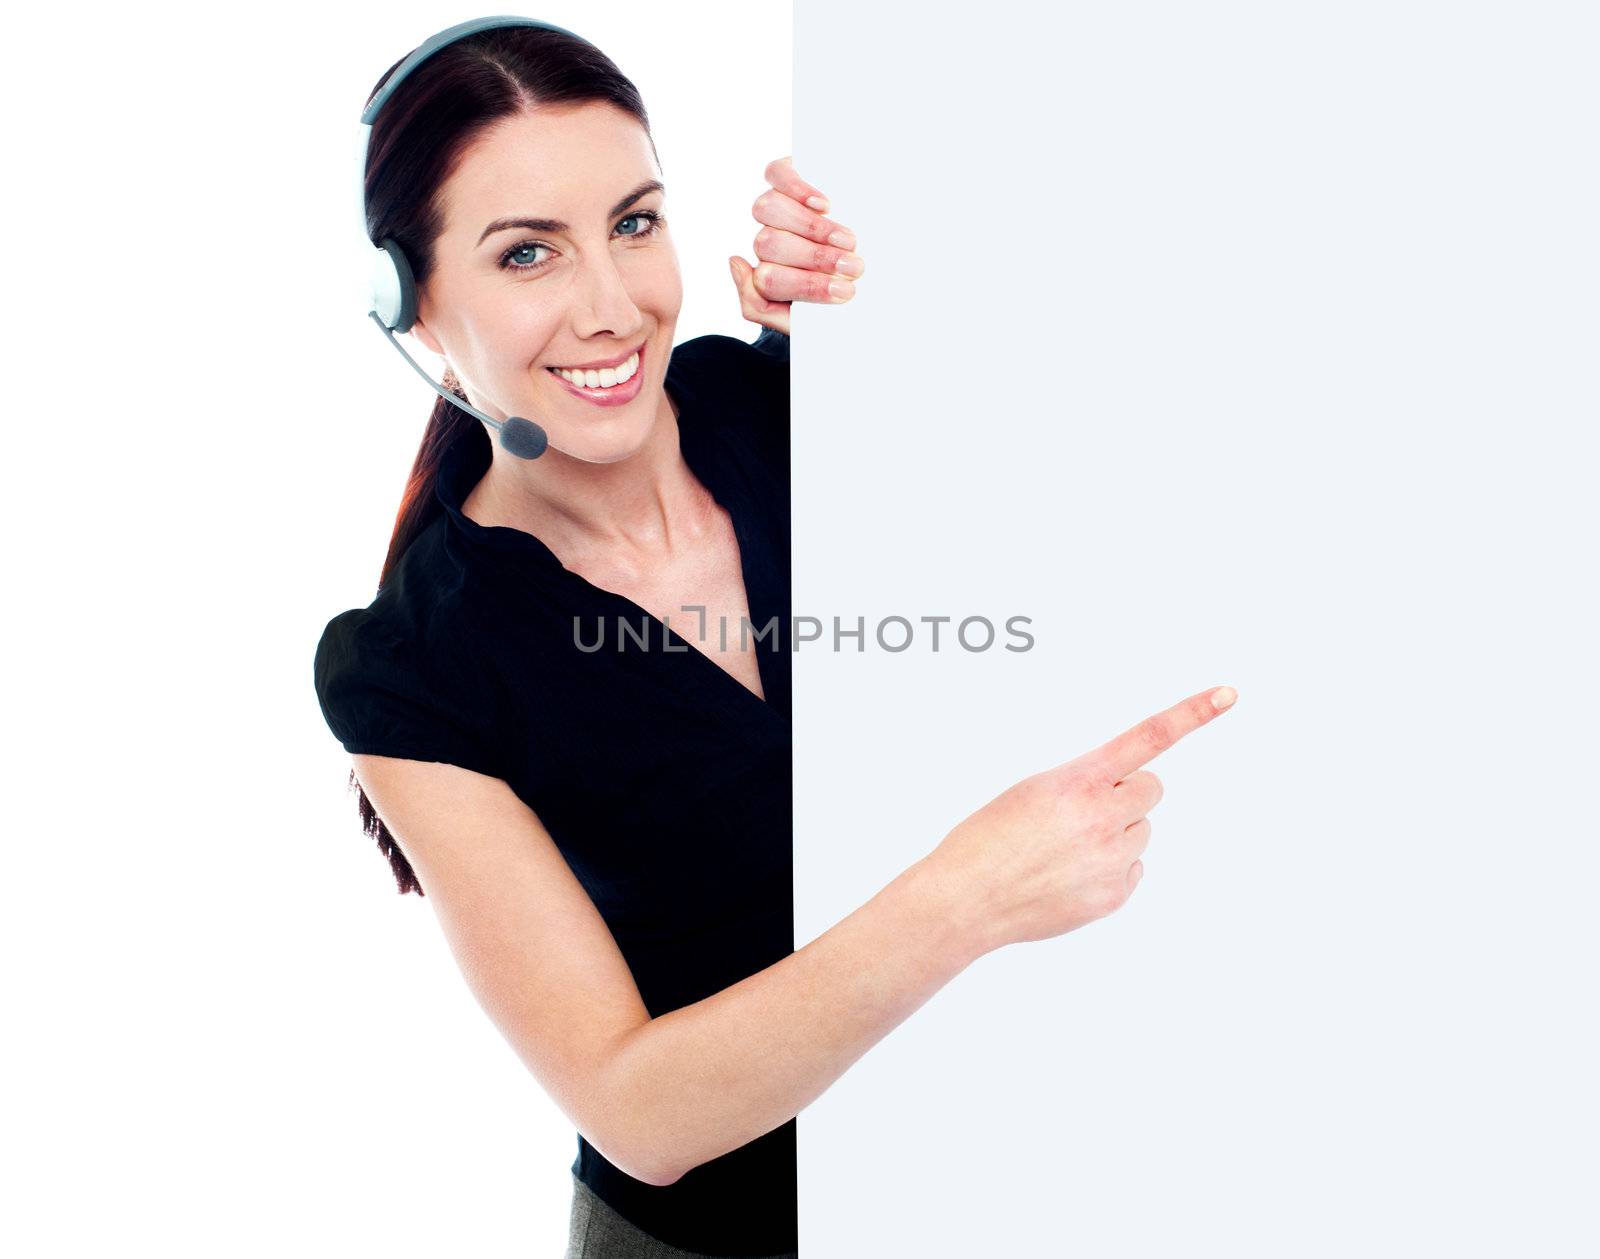 Customer service woman with headset showing and pointing at blank billboard sign banner